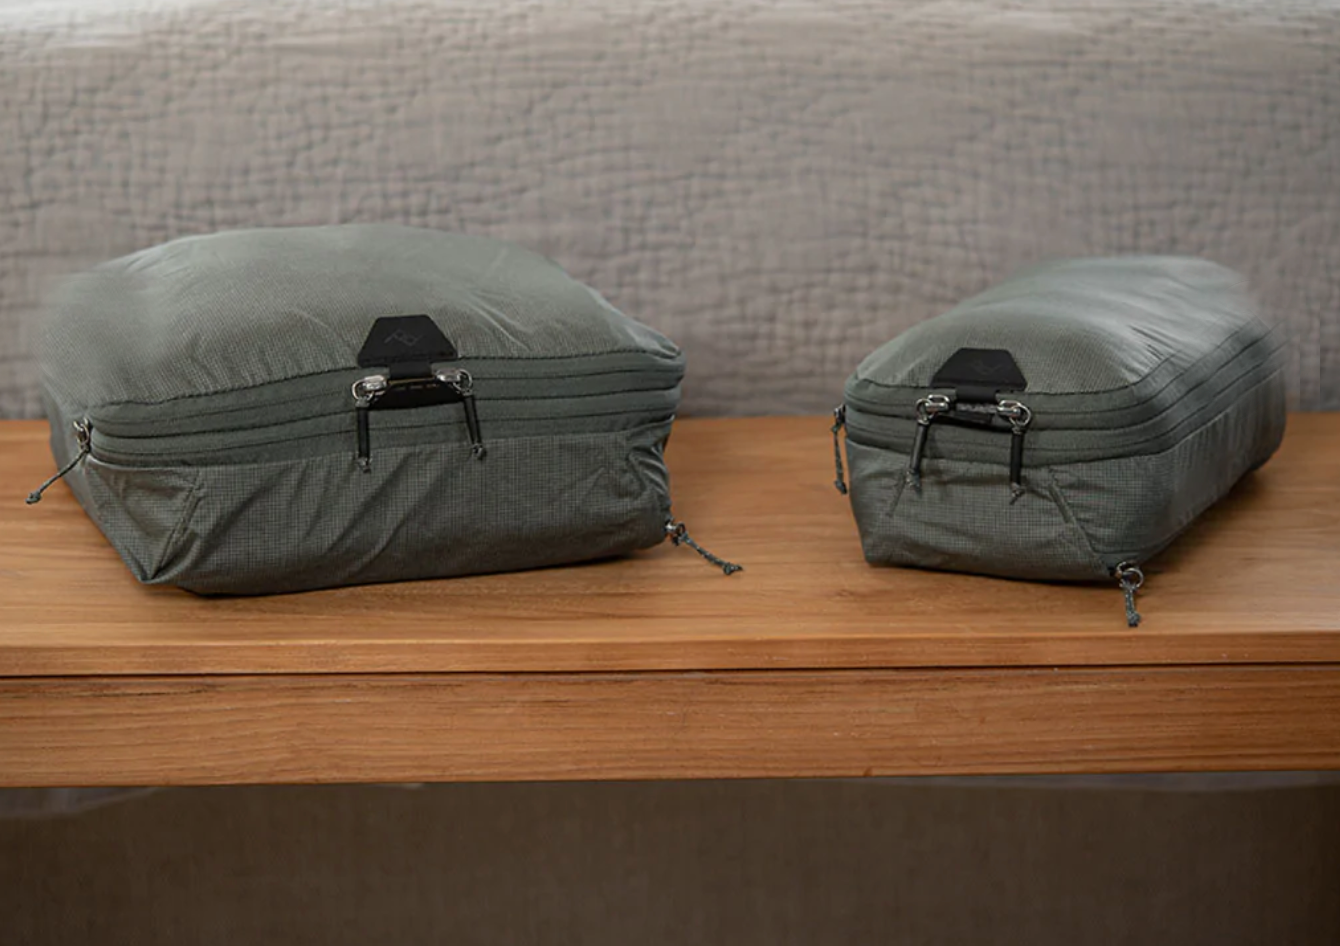 Packing Cubes by Peak Design